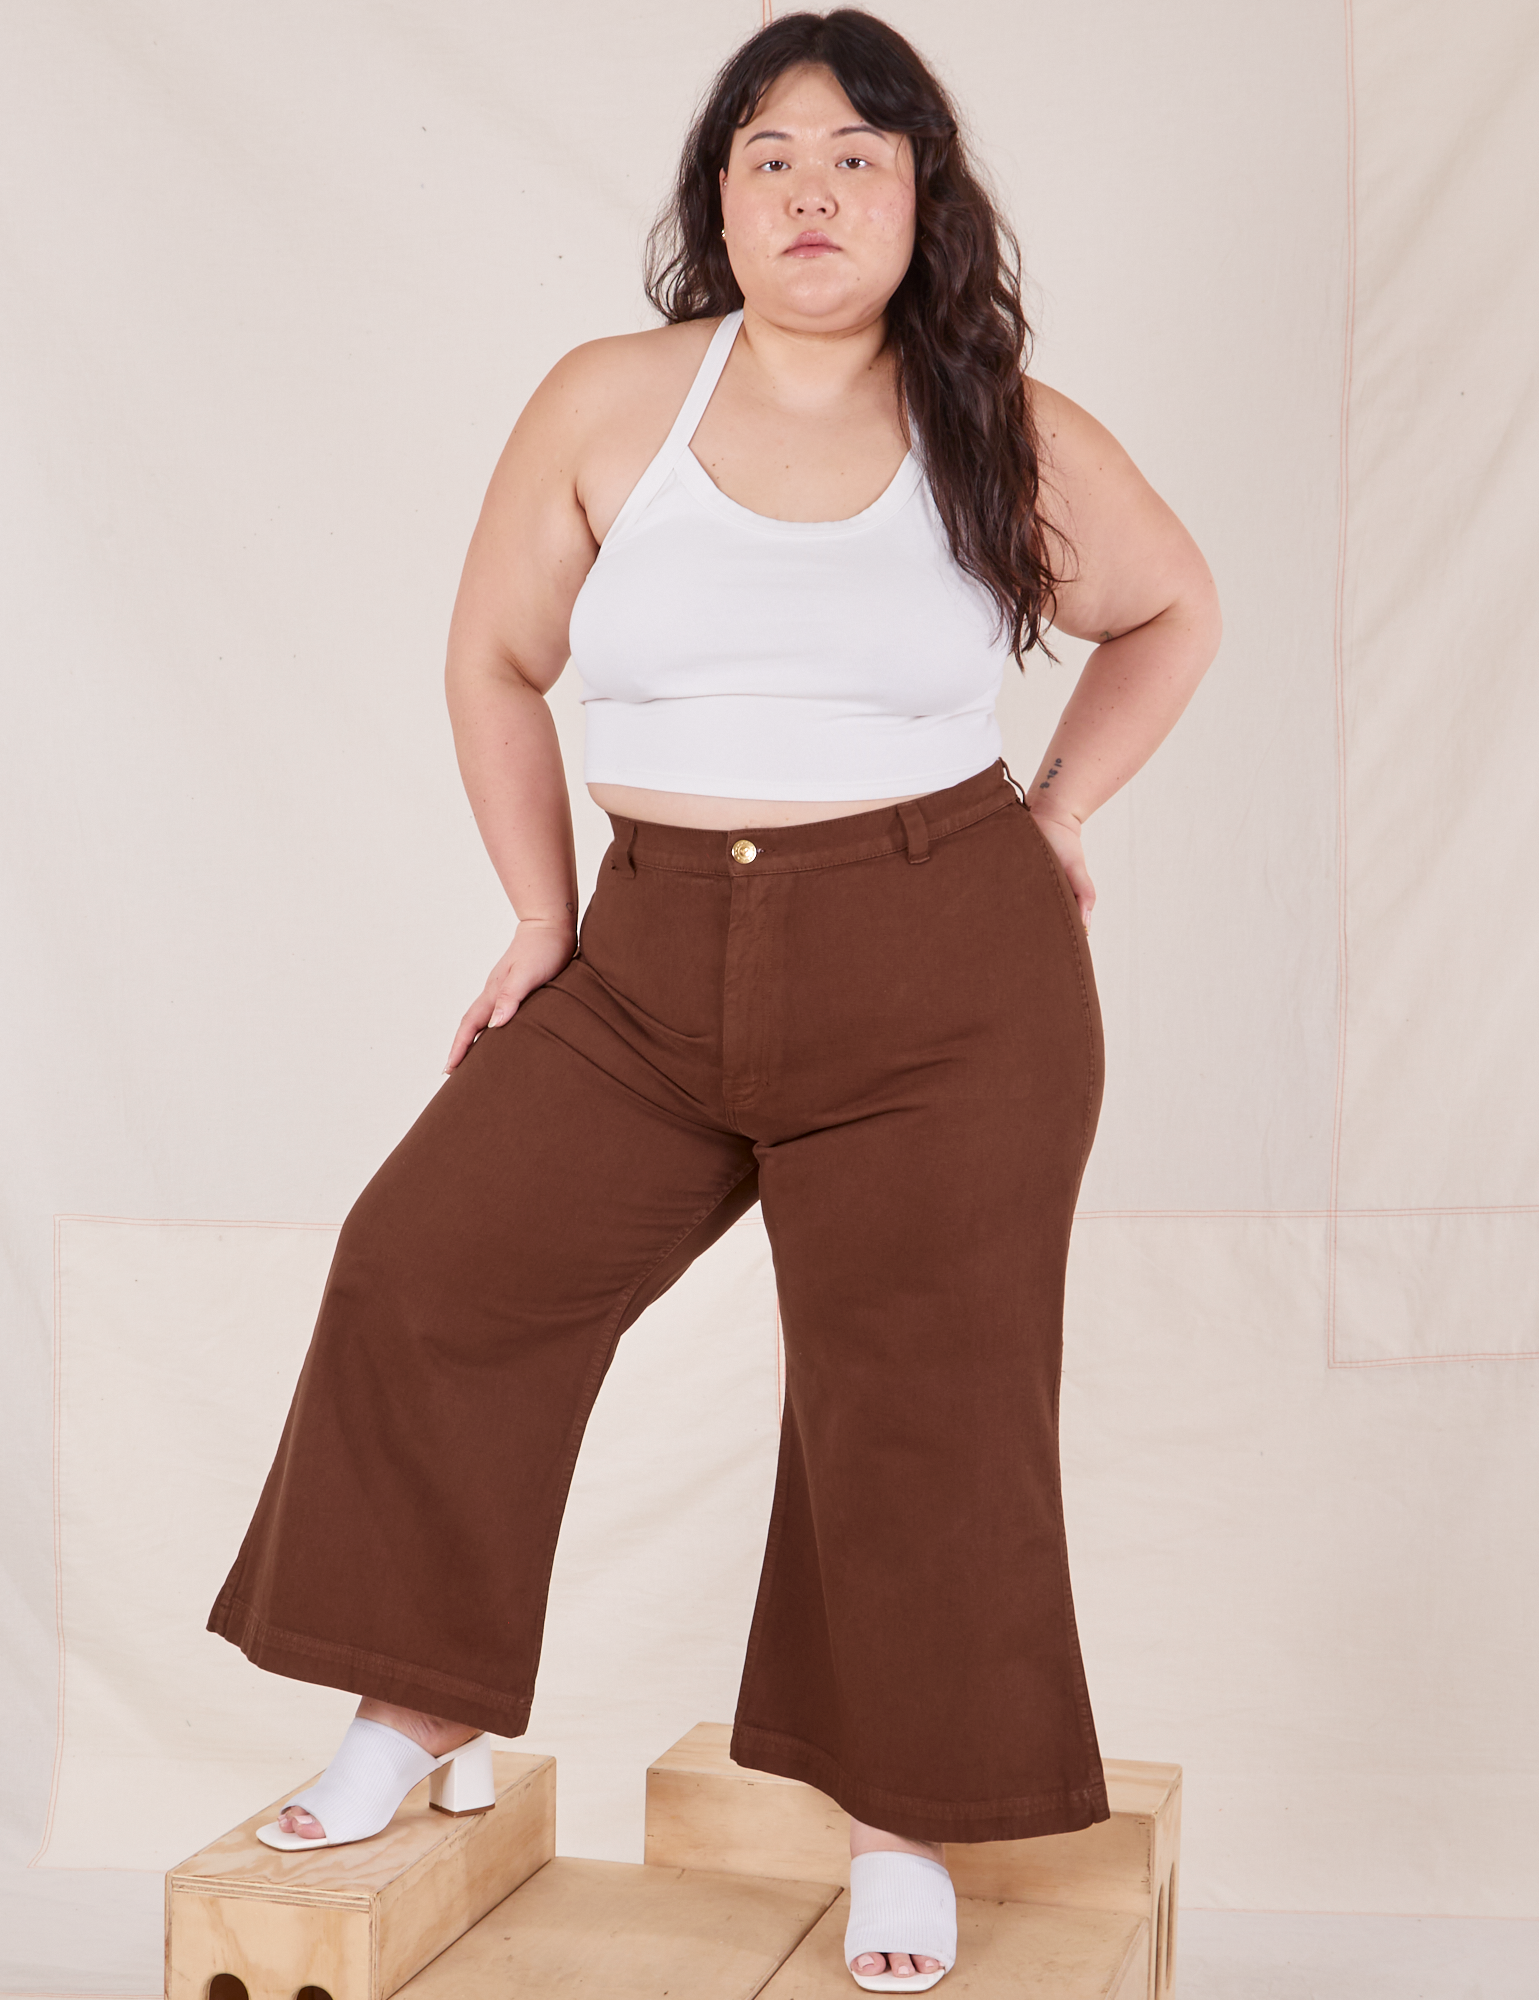 Ashley is 5&#39;7&quot; and wearing 1XL Petite Bell Bottoms in Fudgesicle Brown paired with vintage off-white Halter Top